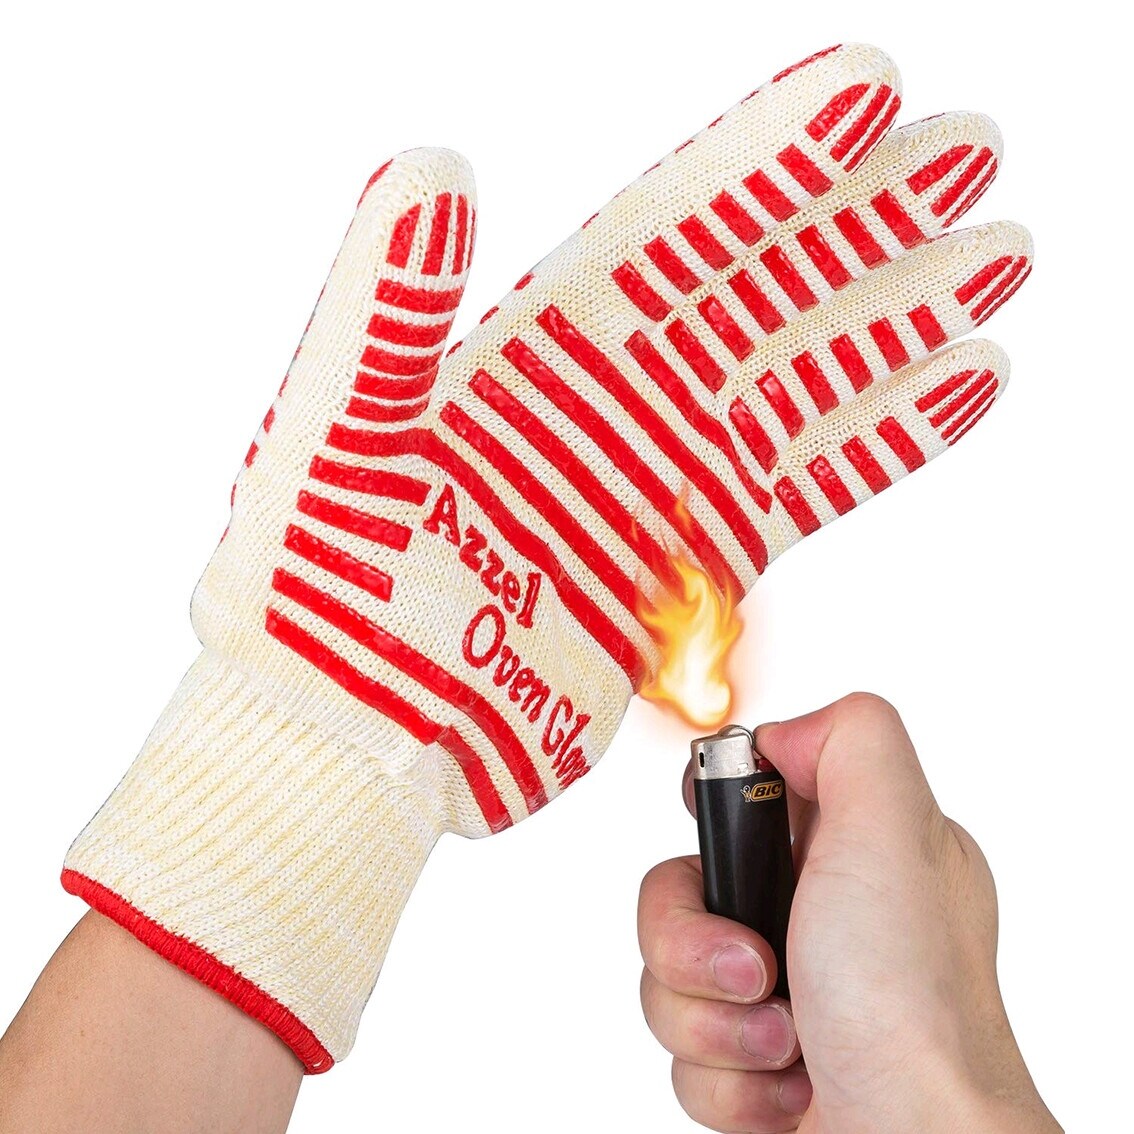 https://ak1.ostkcdn.com/images/products/is/images/direct/6820b0cd2bf57c855de31aa5f6ae130c1cb085b9/Oven-Glove-Oven-Mitts%2CEN407-Certified-Extreme-Heat-Up-to-932%C2%B0F%2CRed.jpg